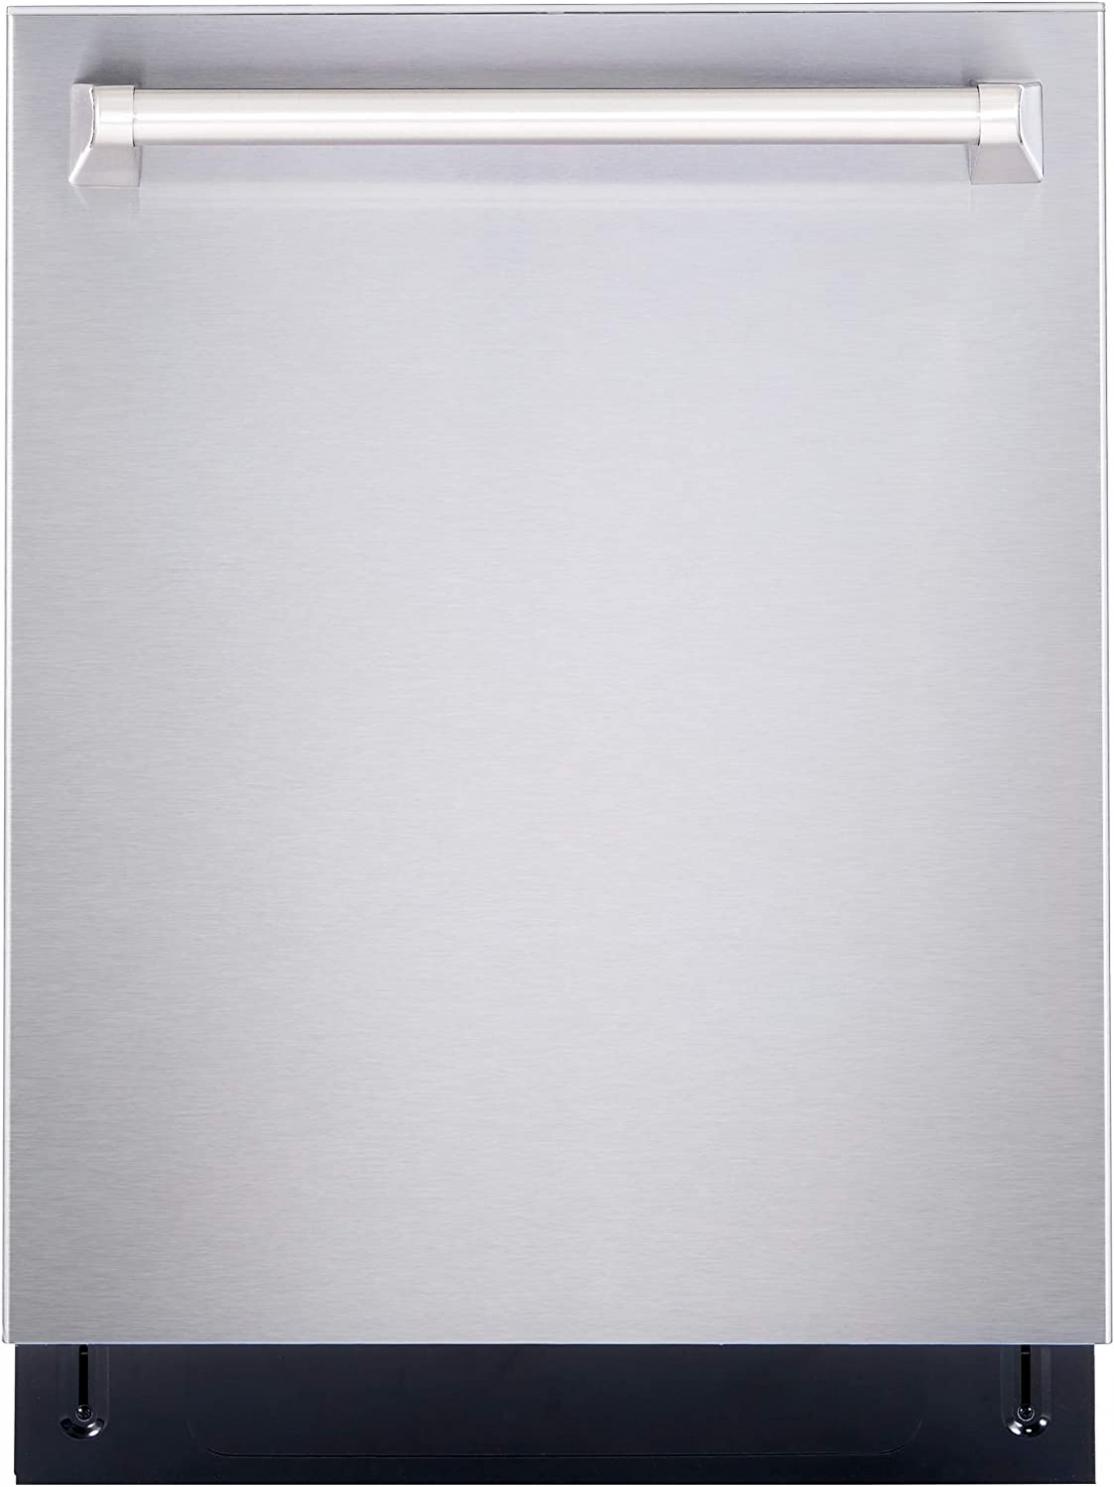 COSMO COS-DIS6502 24 in. Dishwasher in Fingerprint Resistant Stainless Steel with Stainless Steel Tub